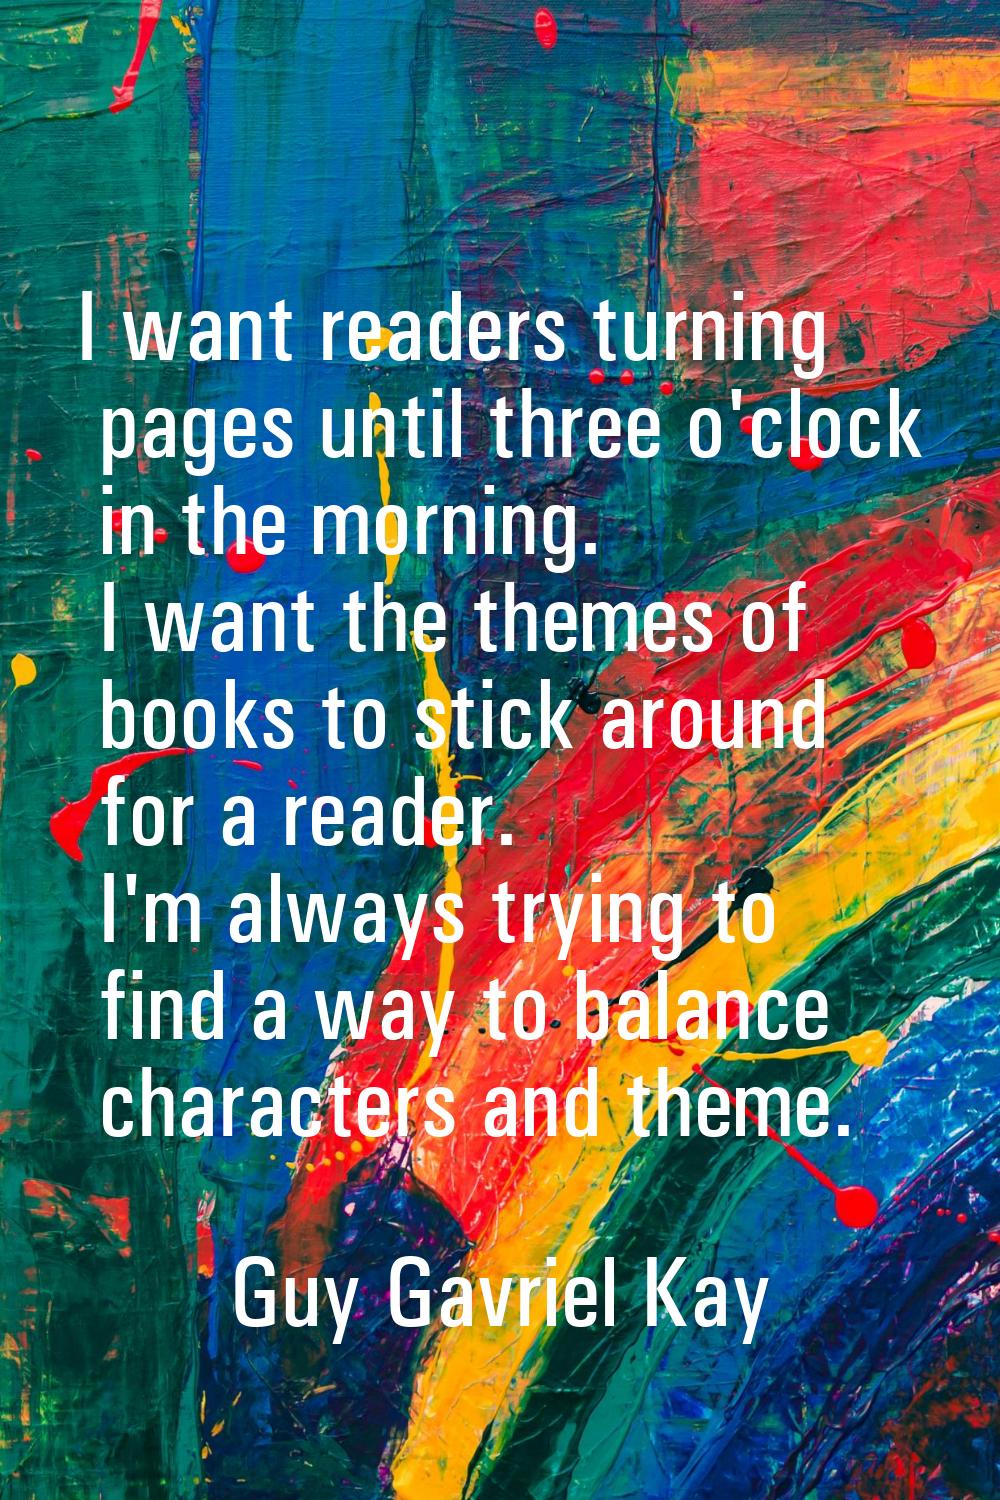 I want readers turning pages until three o'clock in the morning. I want the themes of books to stic